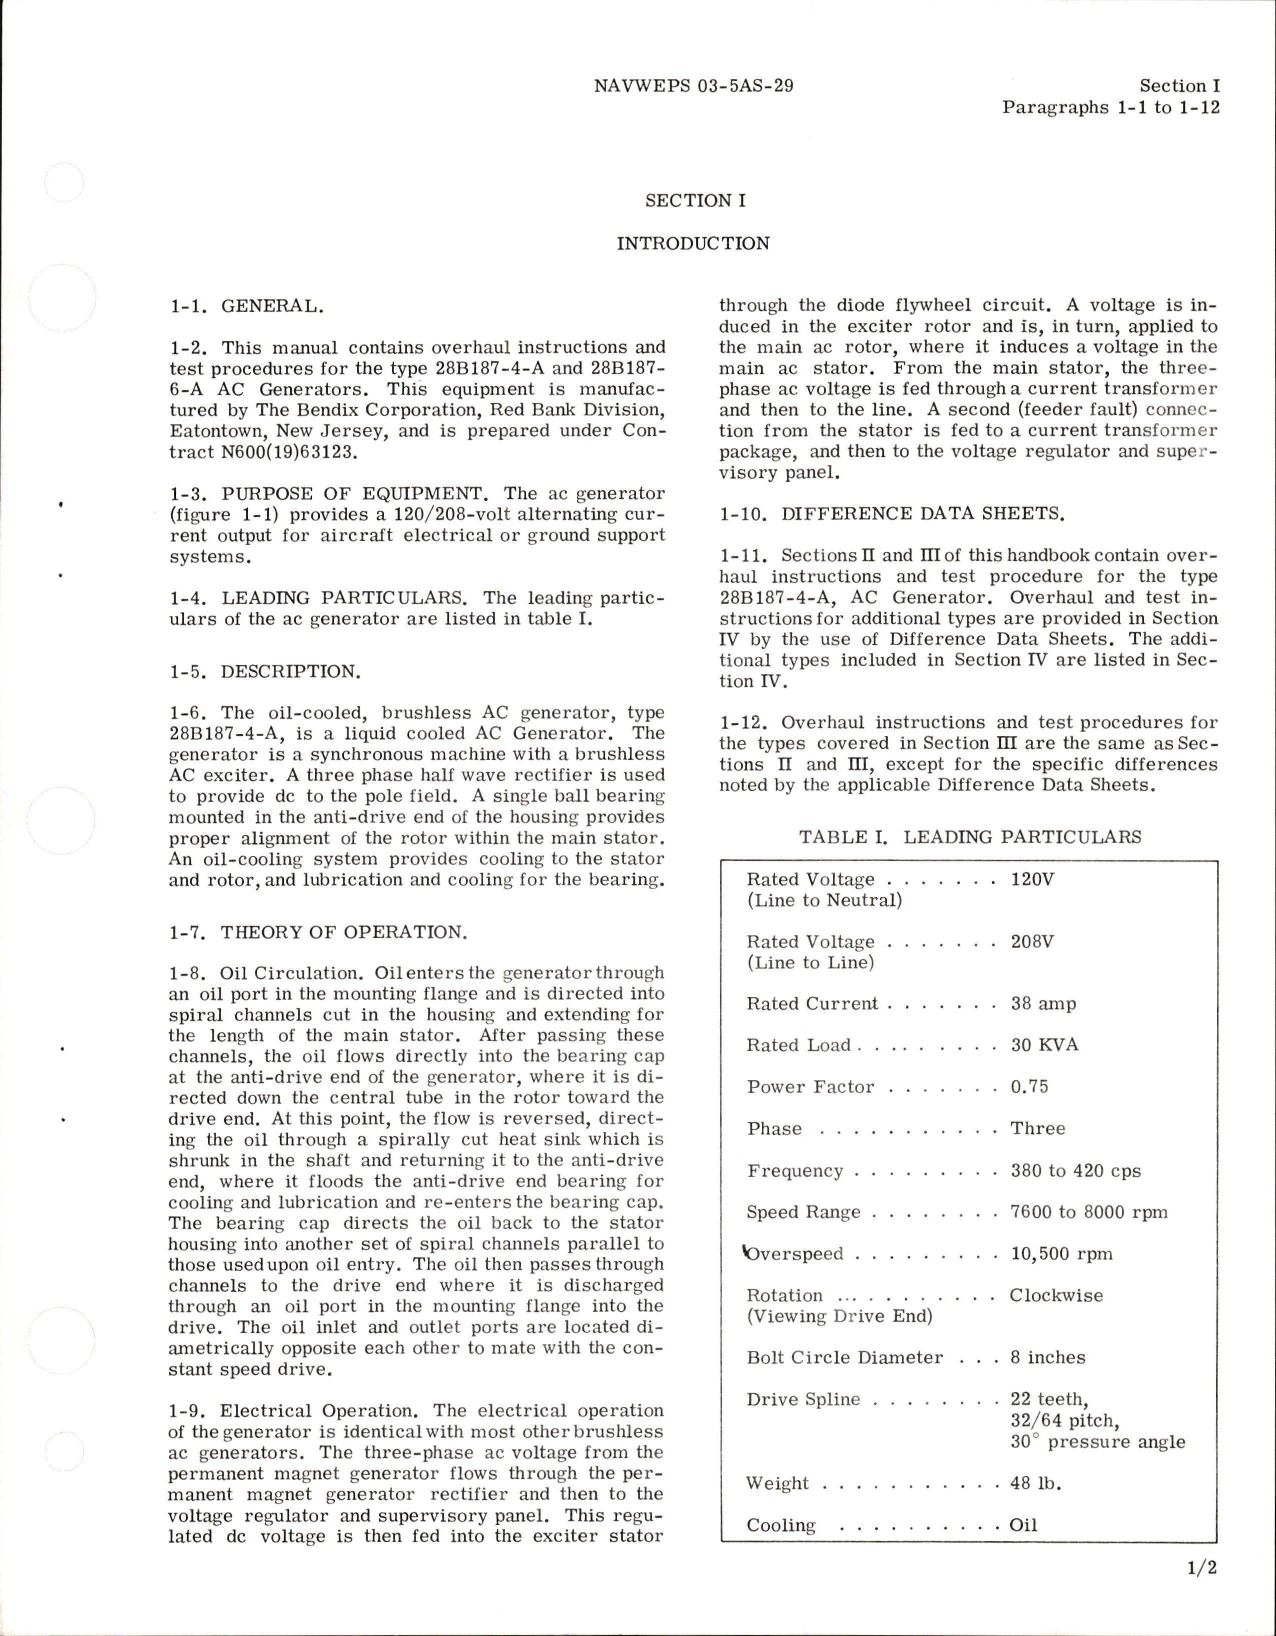 Sample page 5 from AirCorps Library document: Overhaul Instructions for AC Generator - Type 28B187-4-A, 28B187-6-A